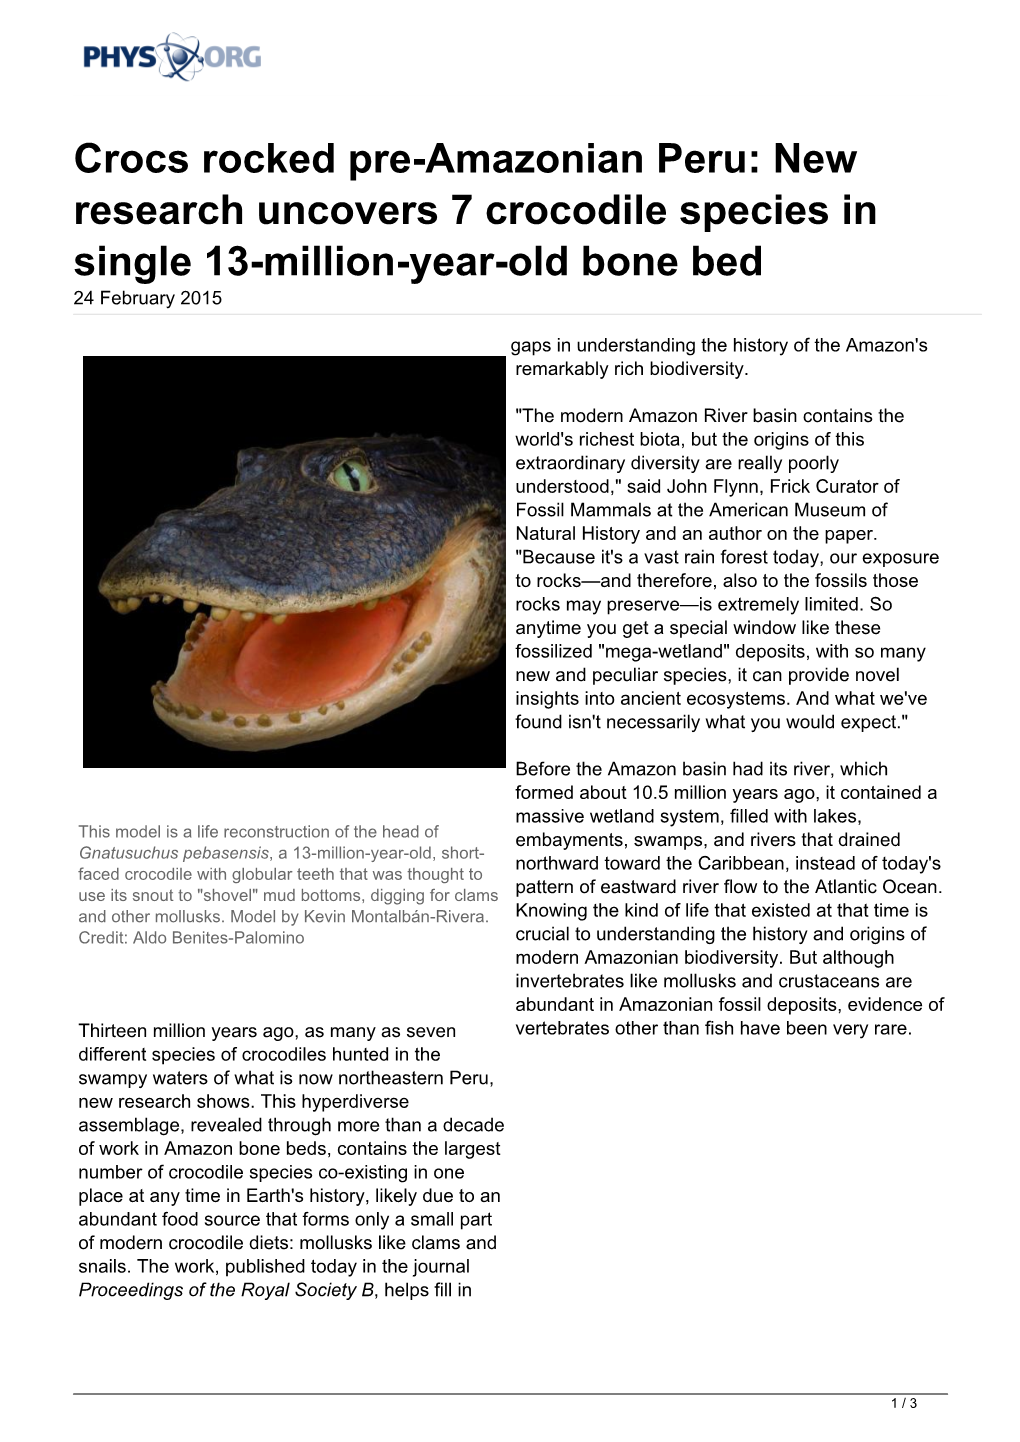 Crocs Rocked Pre-Amazonian Peru: New Research Uncovers 7 Crocodile Species in Single 13-Million-Year-Old Bone Bed 24 February 2015